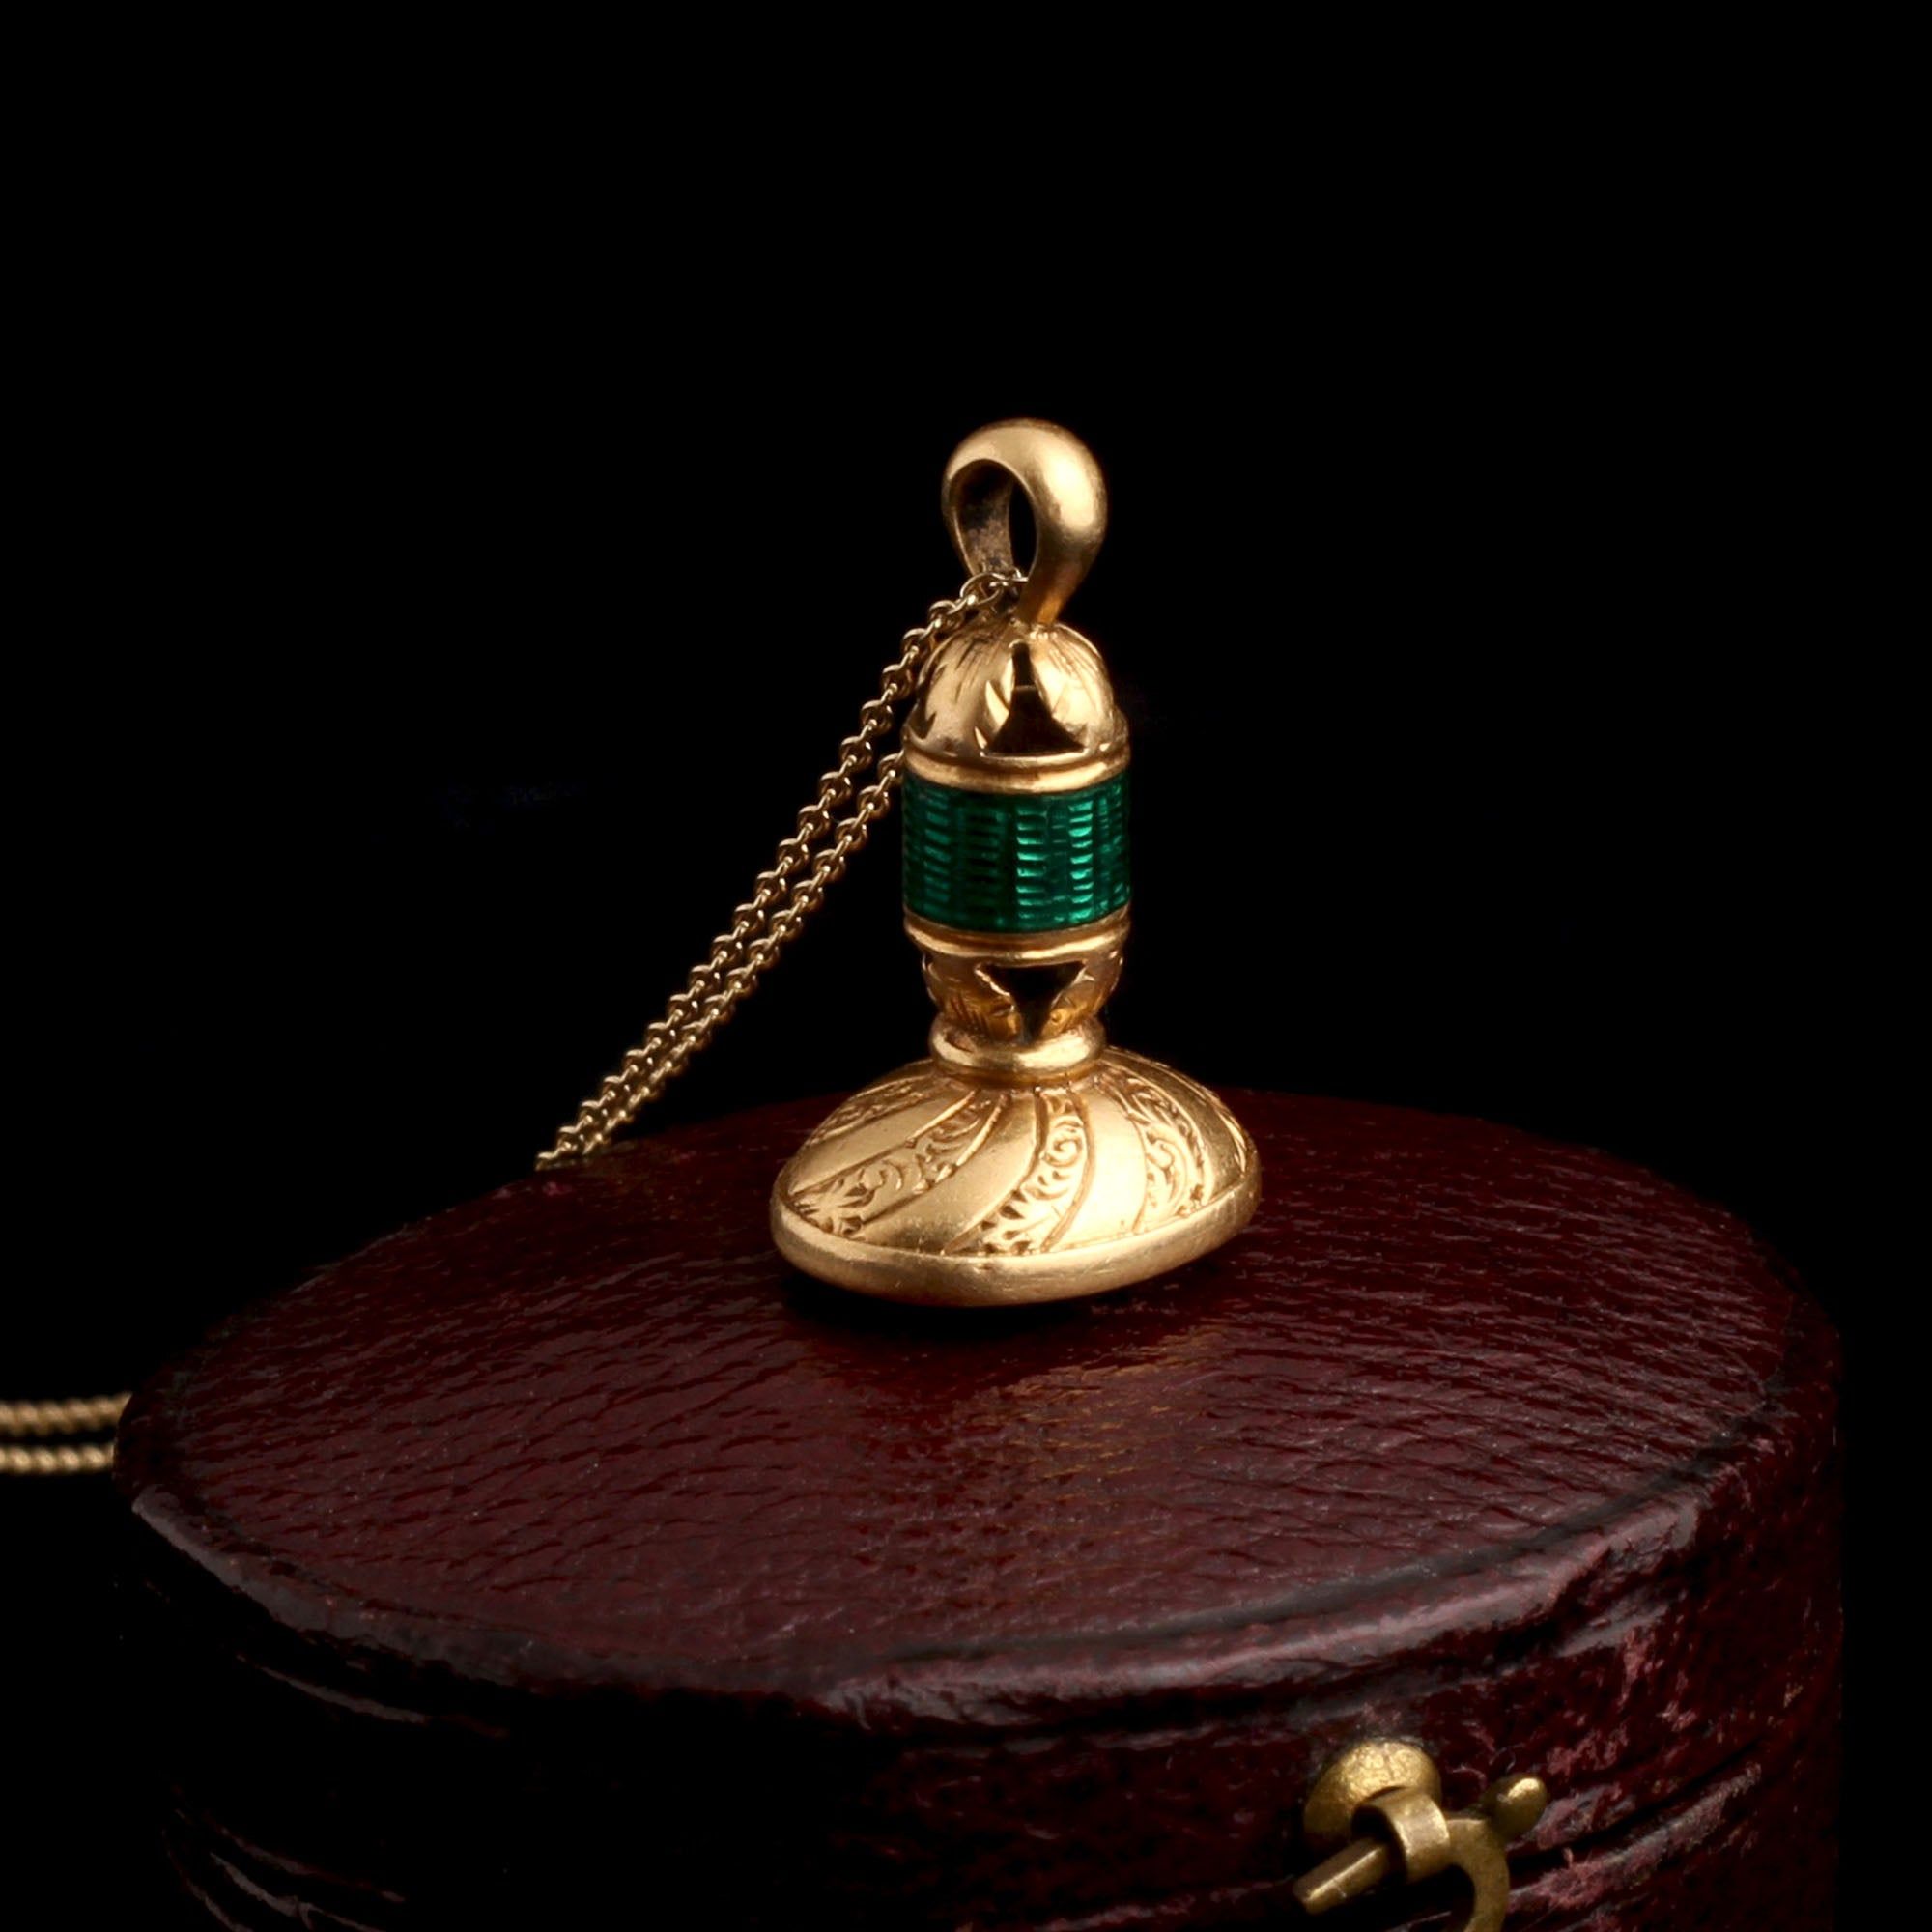 Early 19th Century French Gold & Enamel "P" Wax Seal Necklace